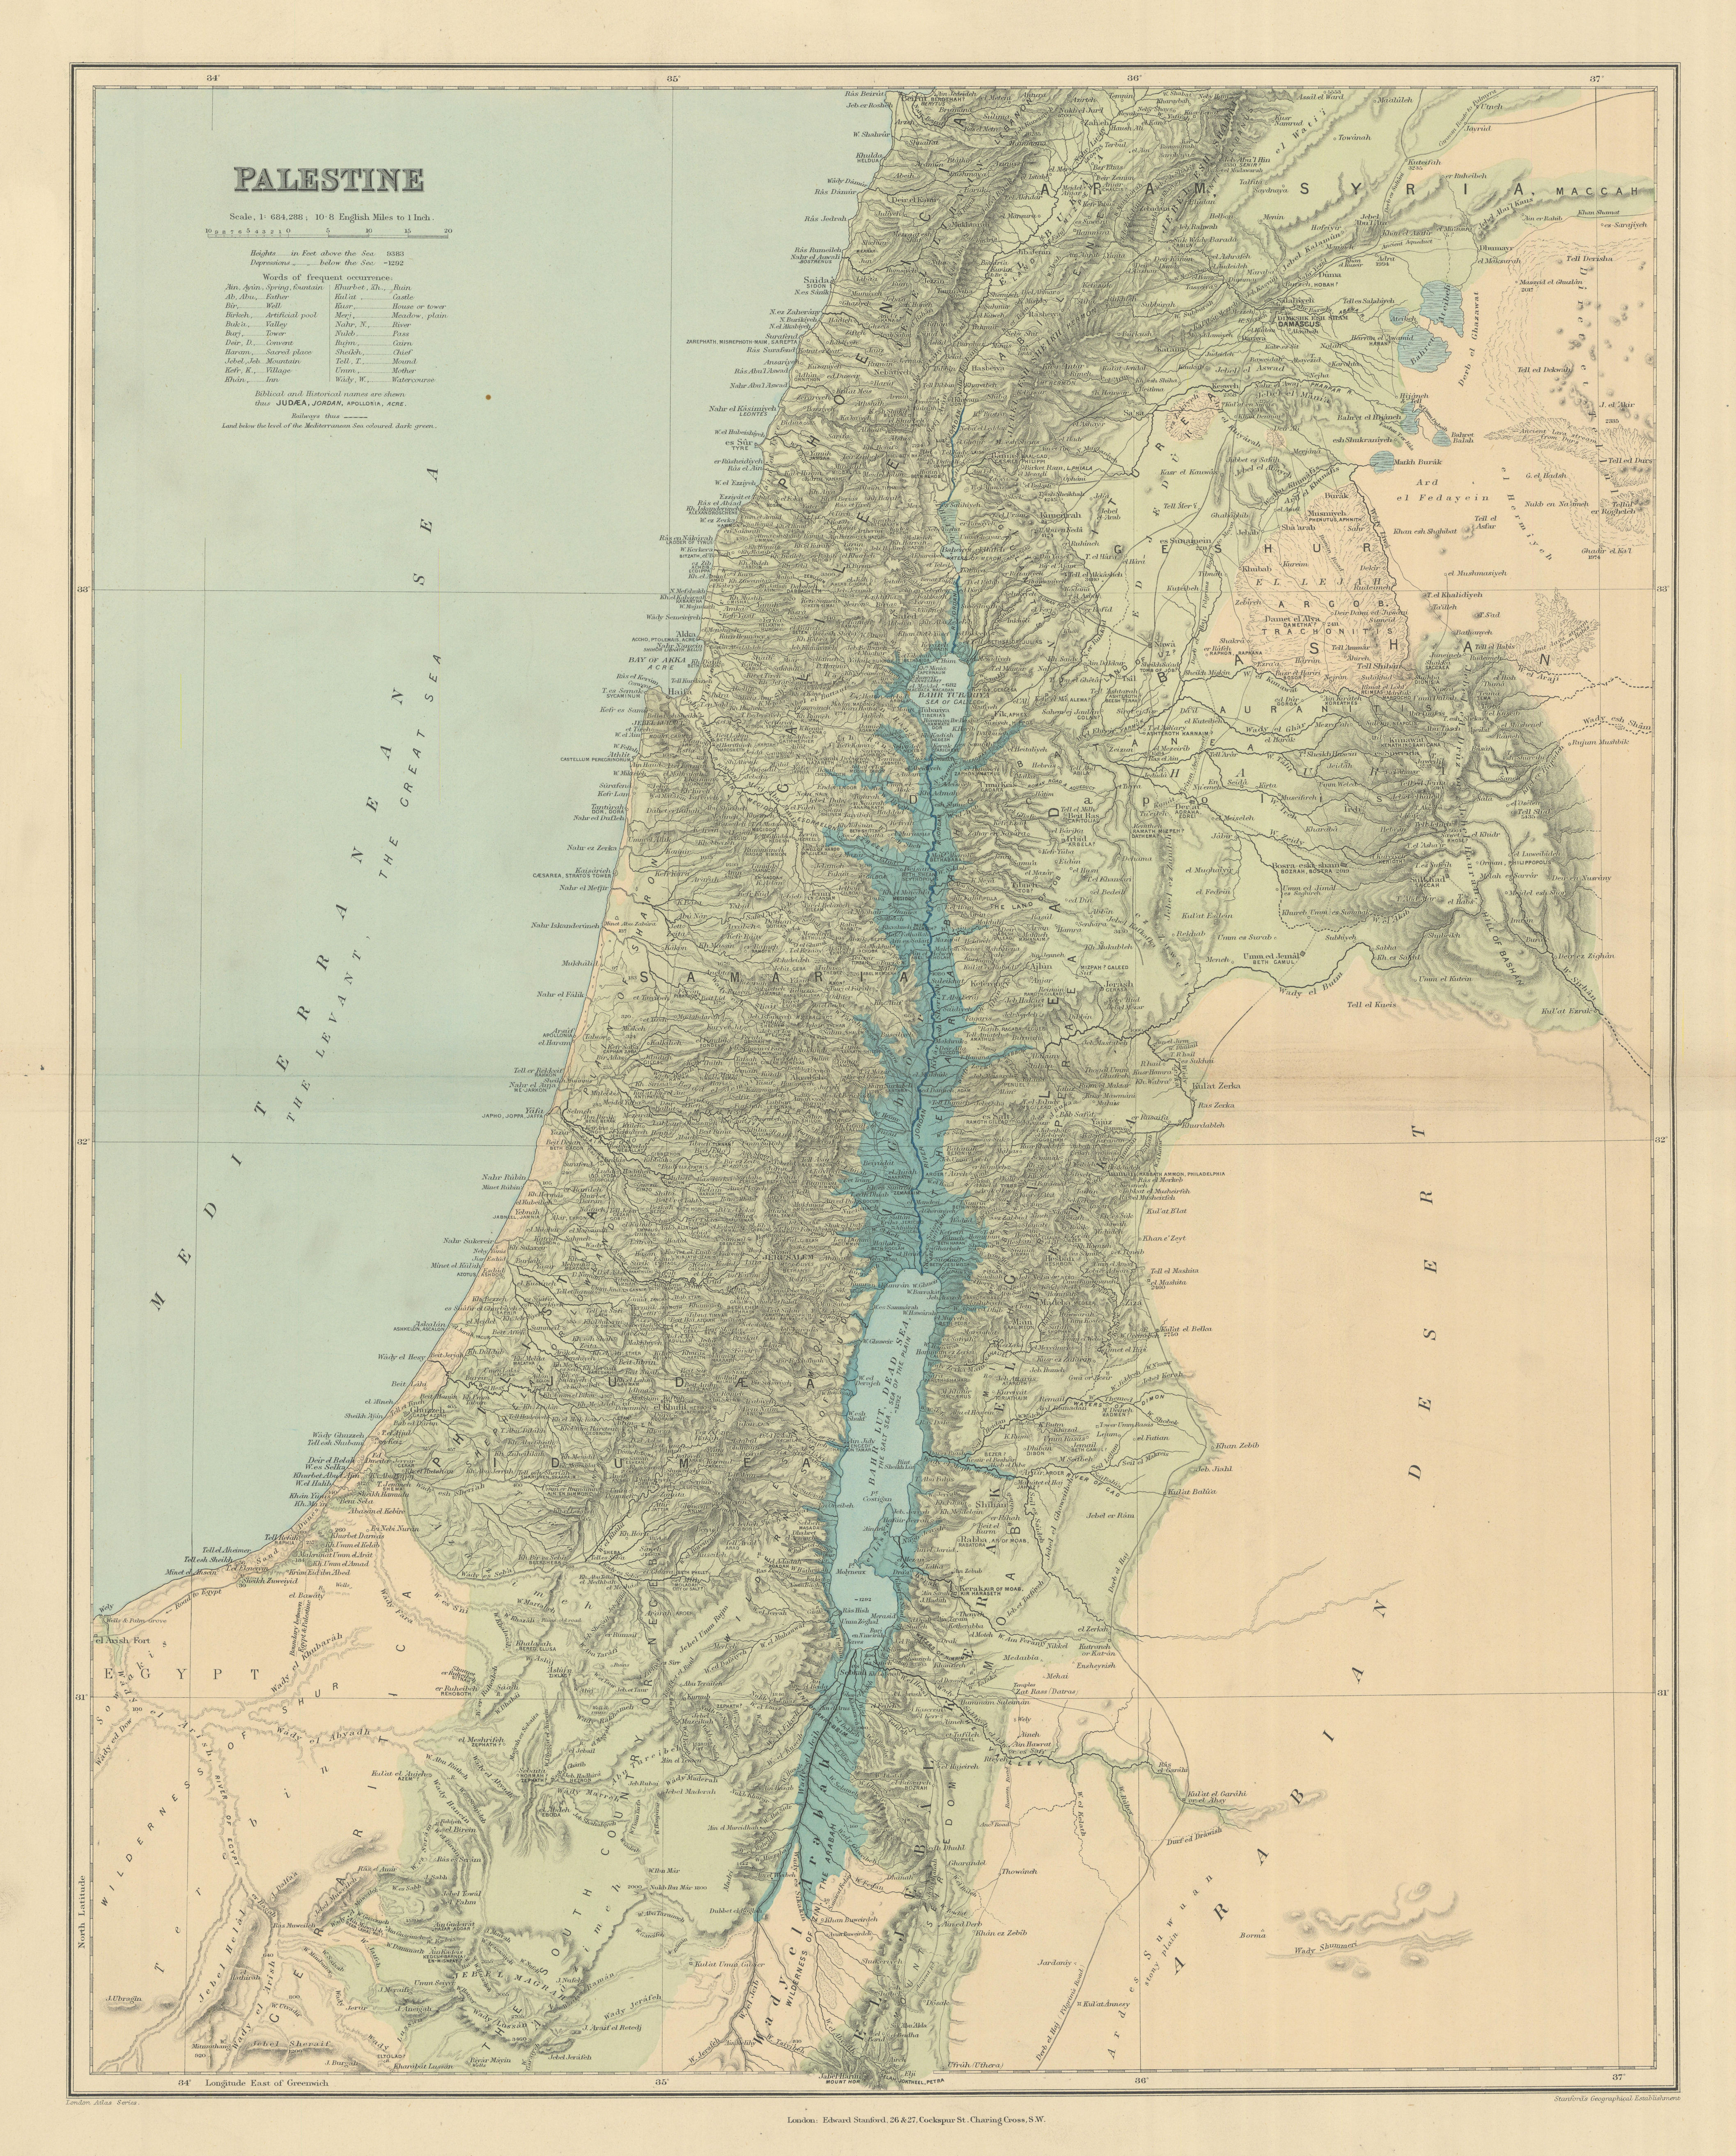 Associate Product Palestine Holy Land Israel. Biblical & historical names. STANFORD 1894 old map